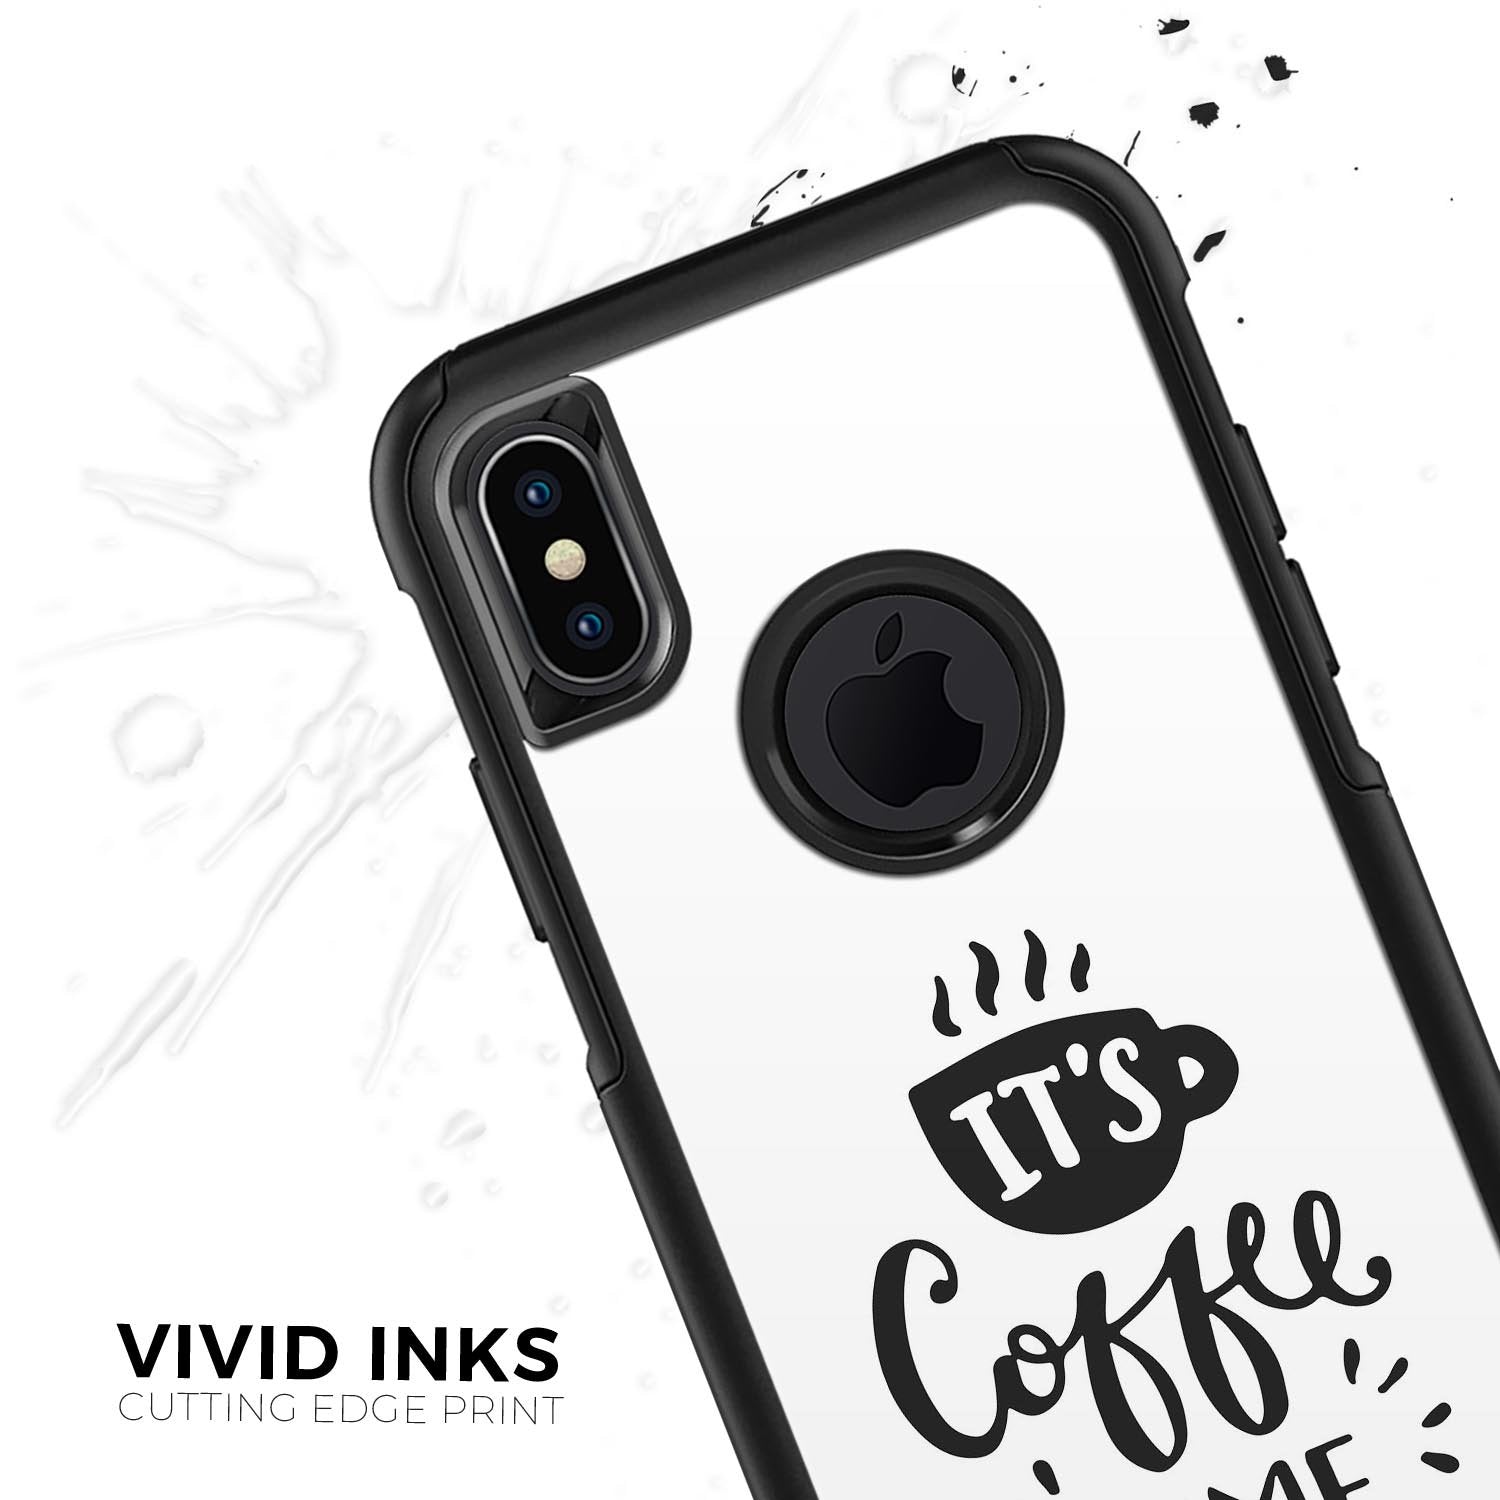 Its Coffee Time - Skin Kit for the iPhone OtterBox Cases